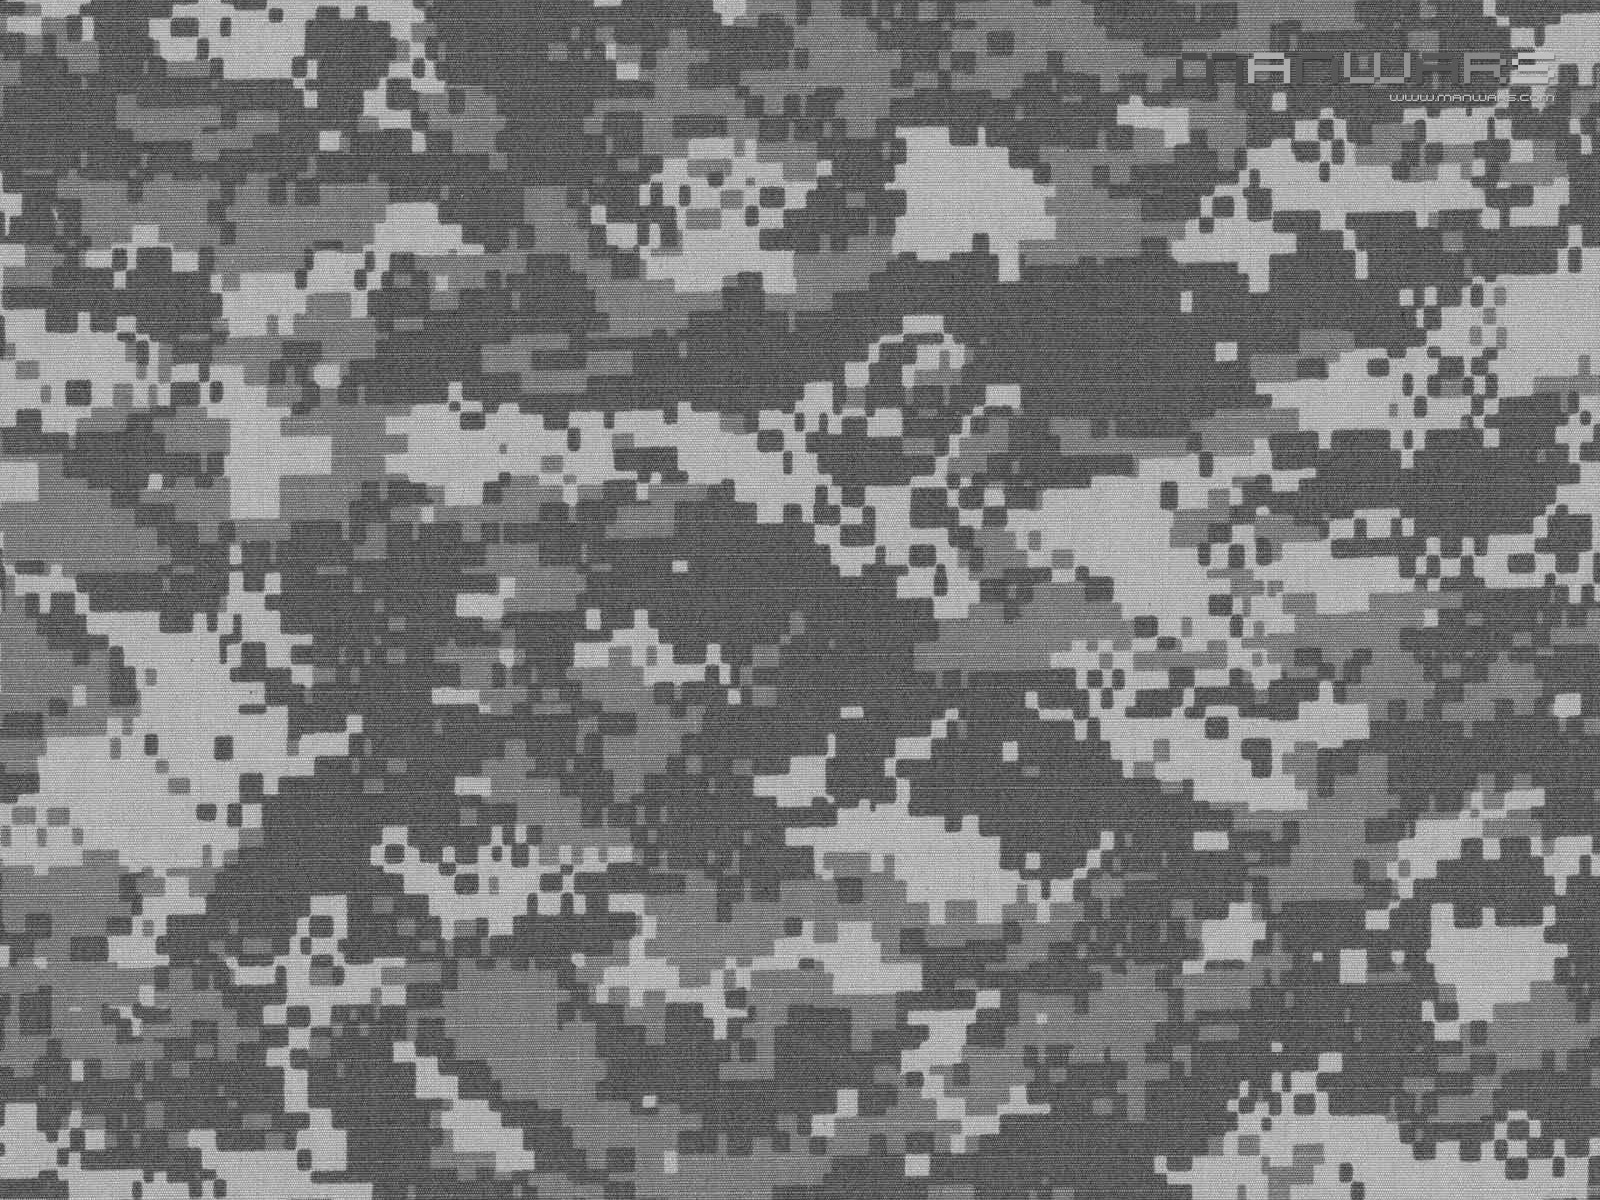 Camouflage Wallpaper